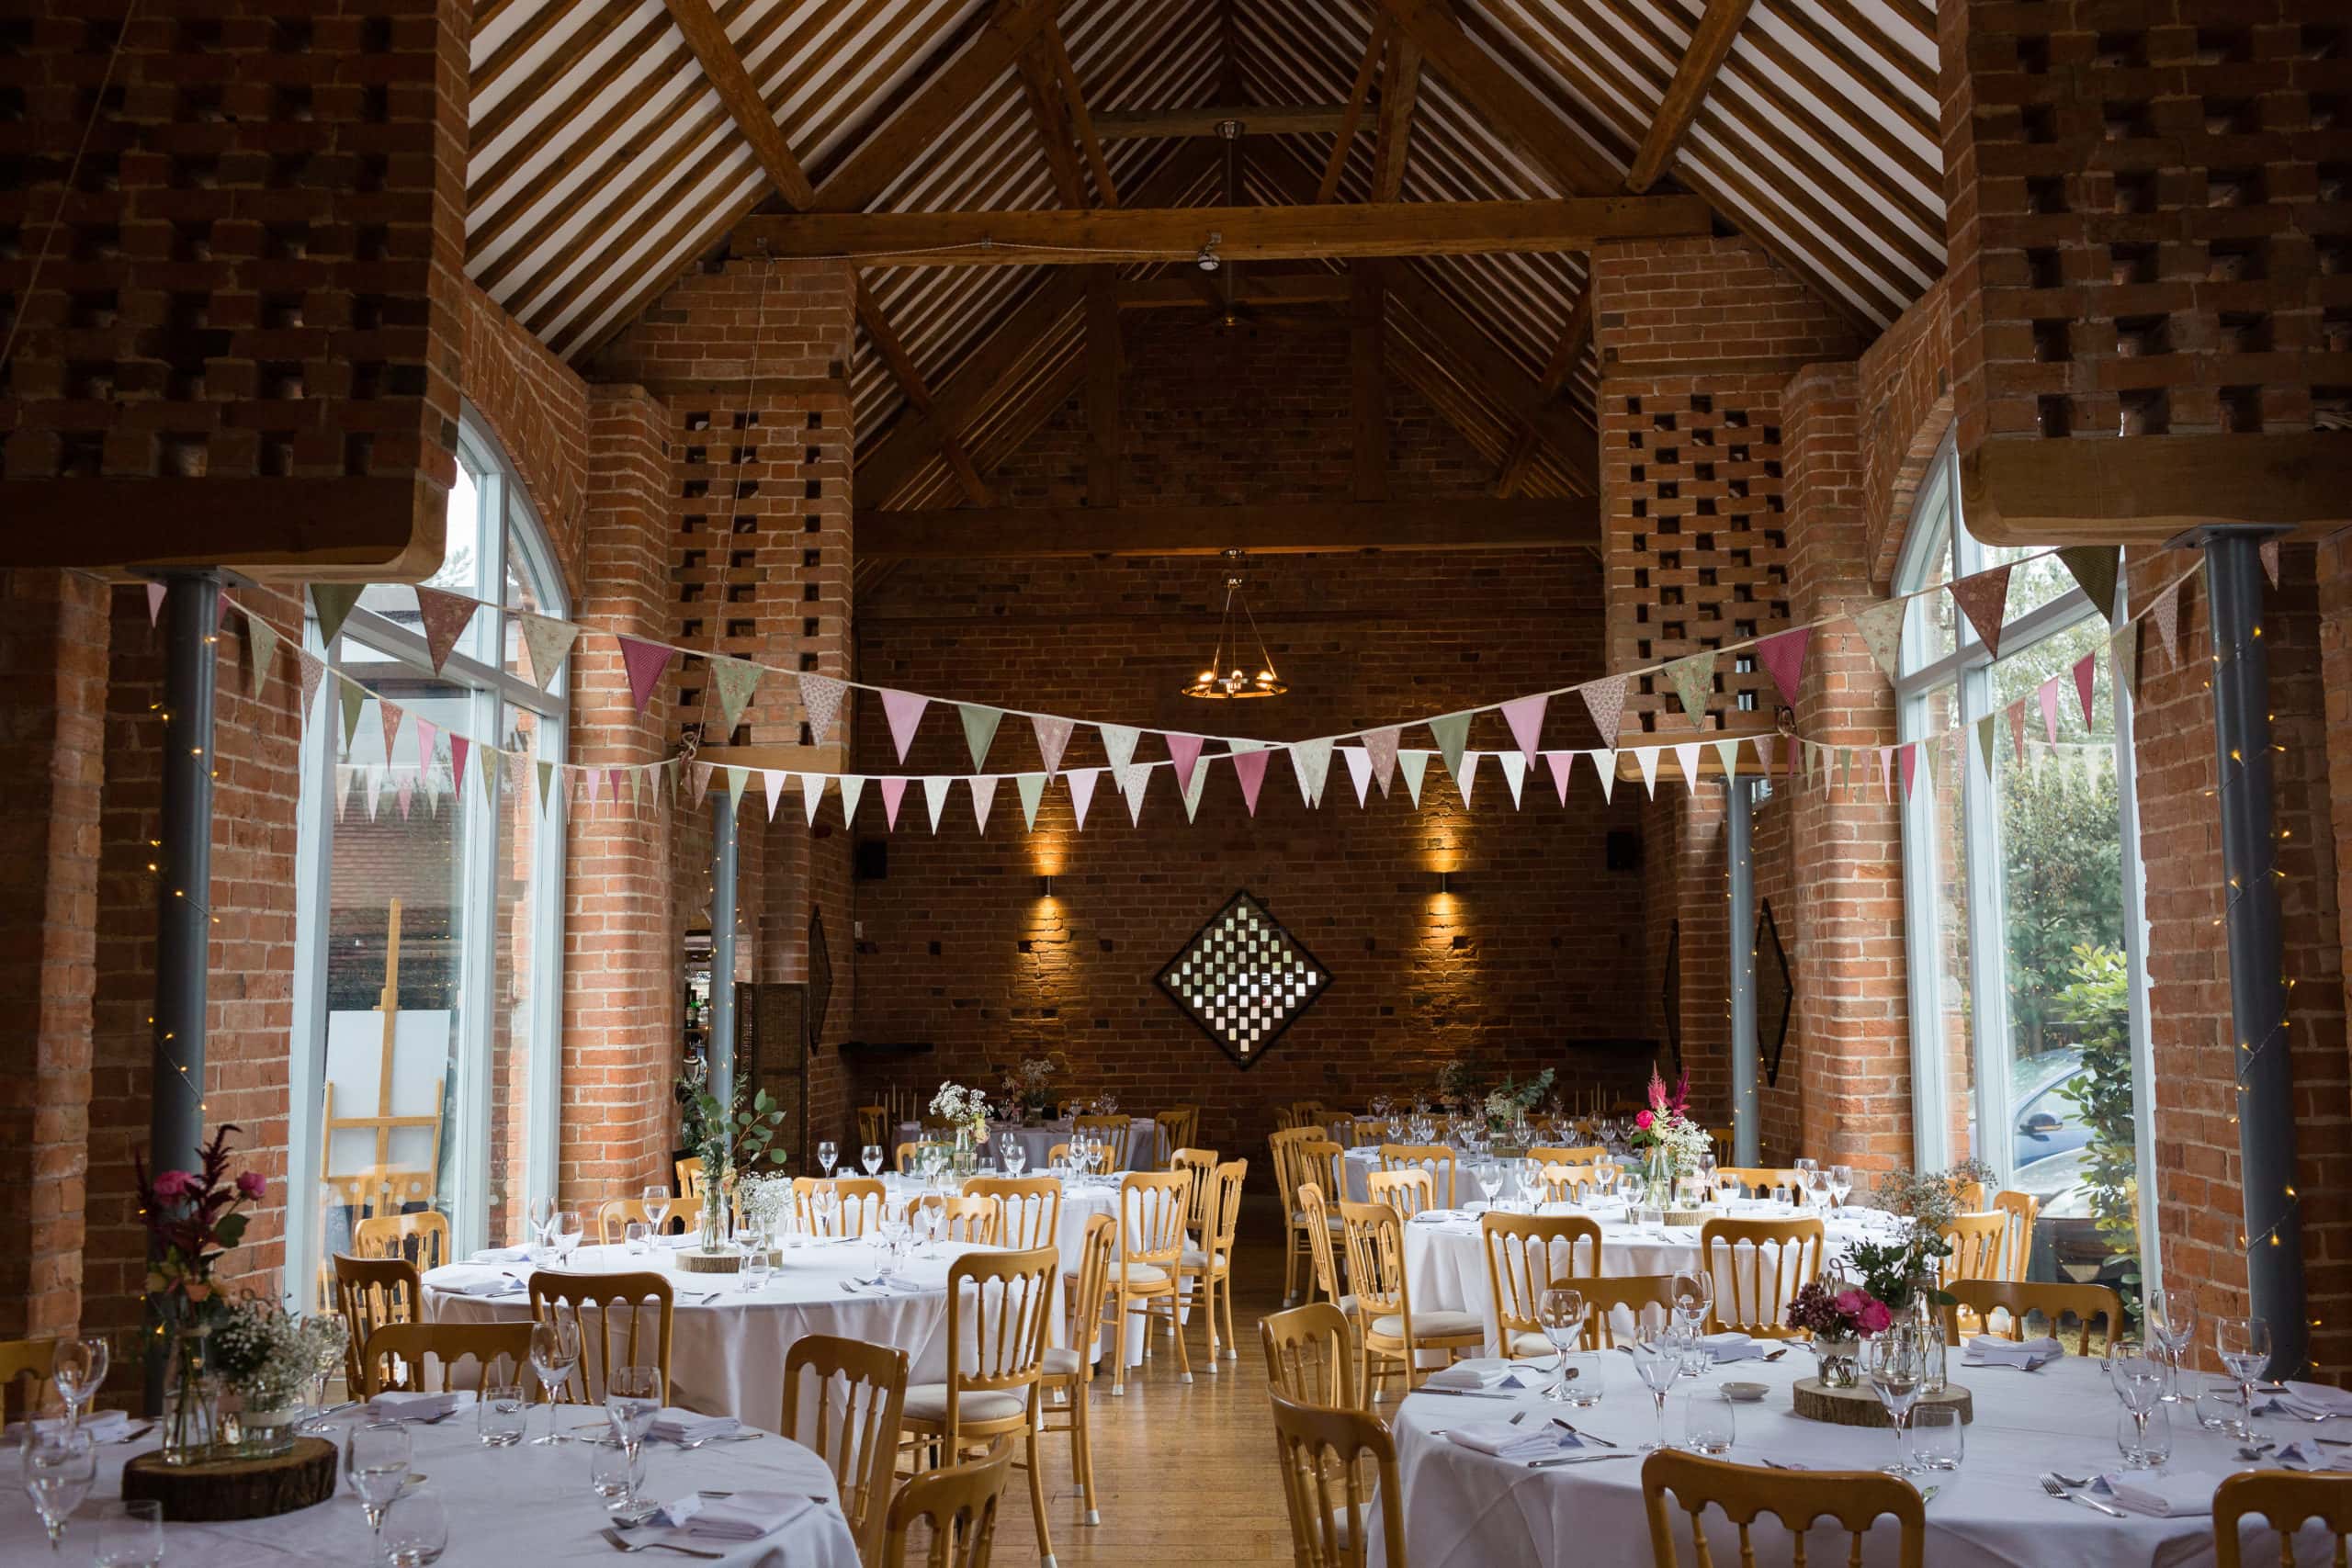 Interior of Swallows Nest Barn with pretty bunting ready for wedding meal